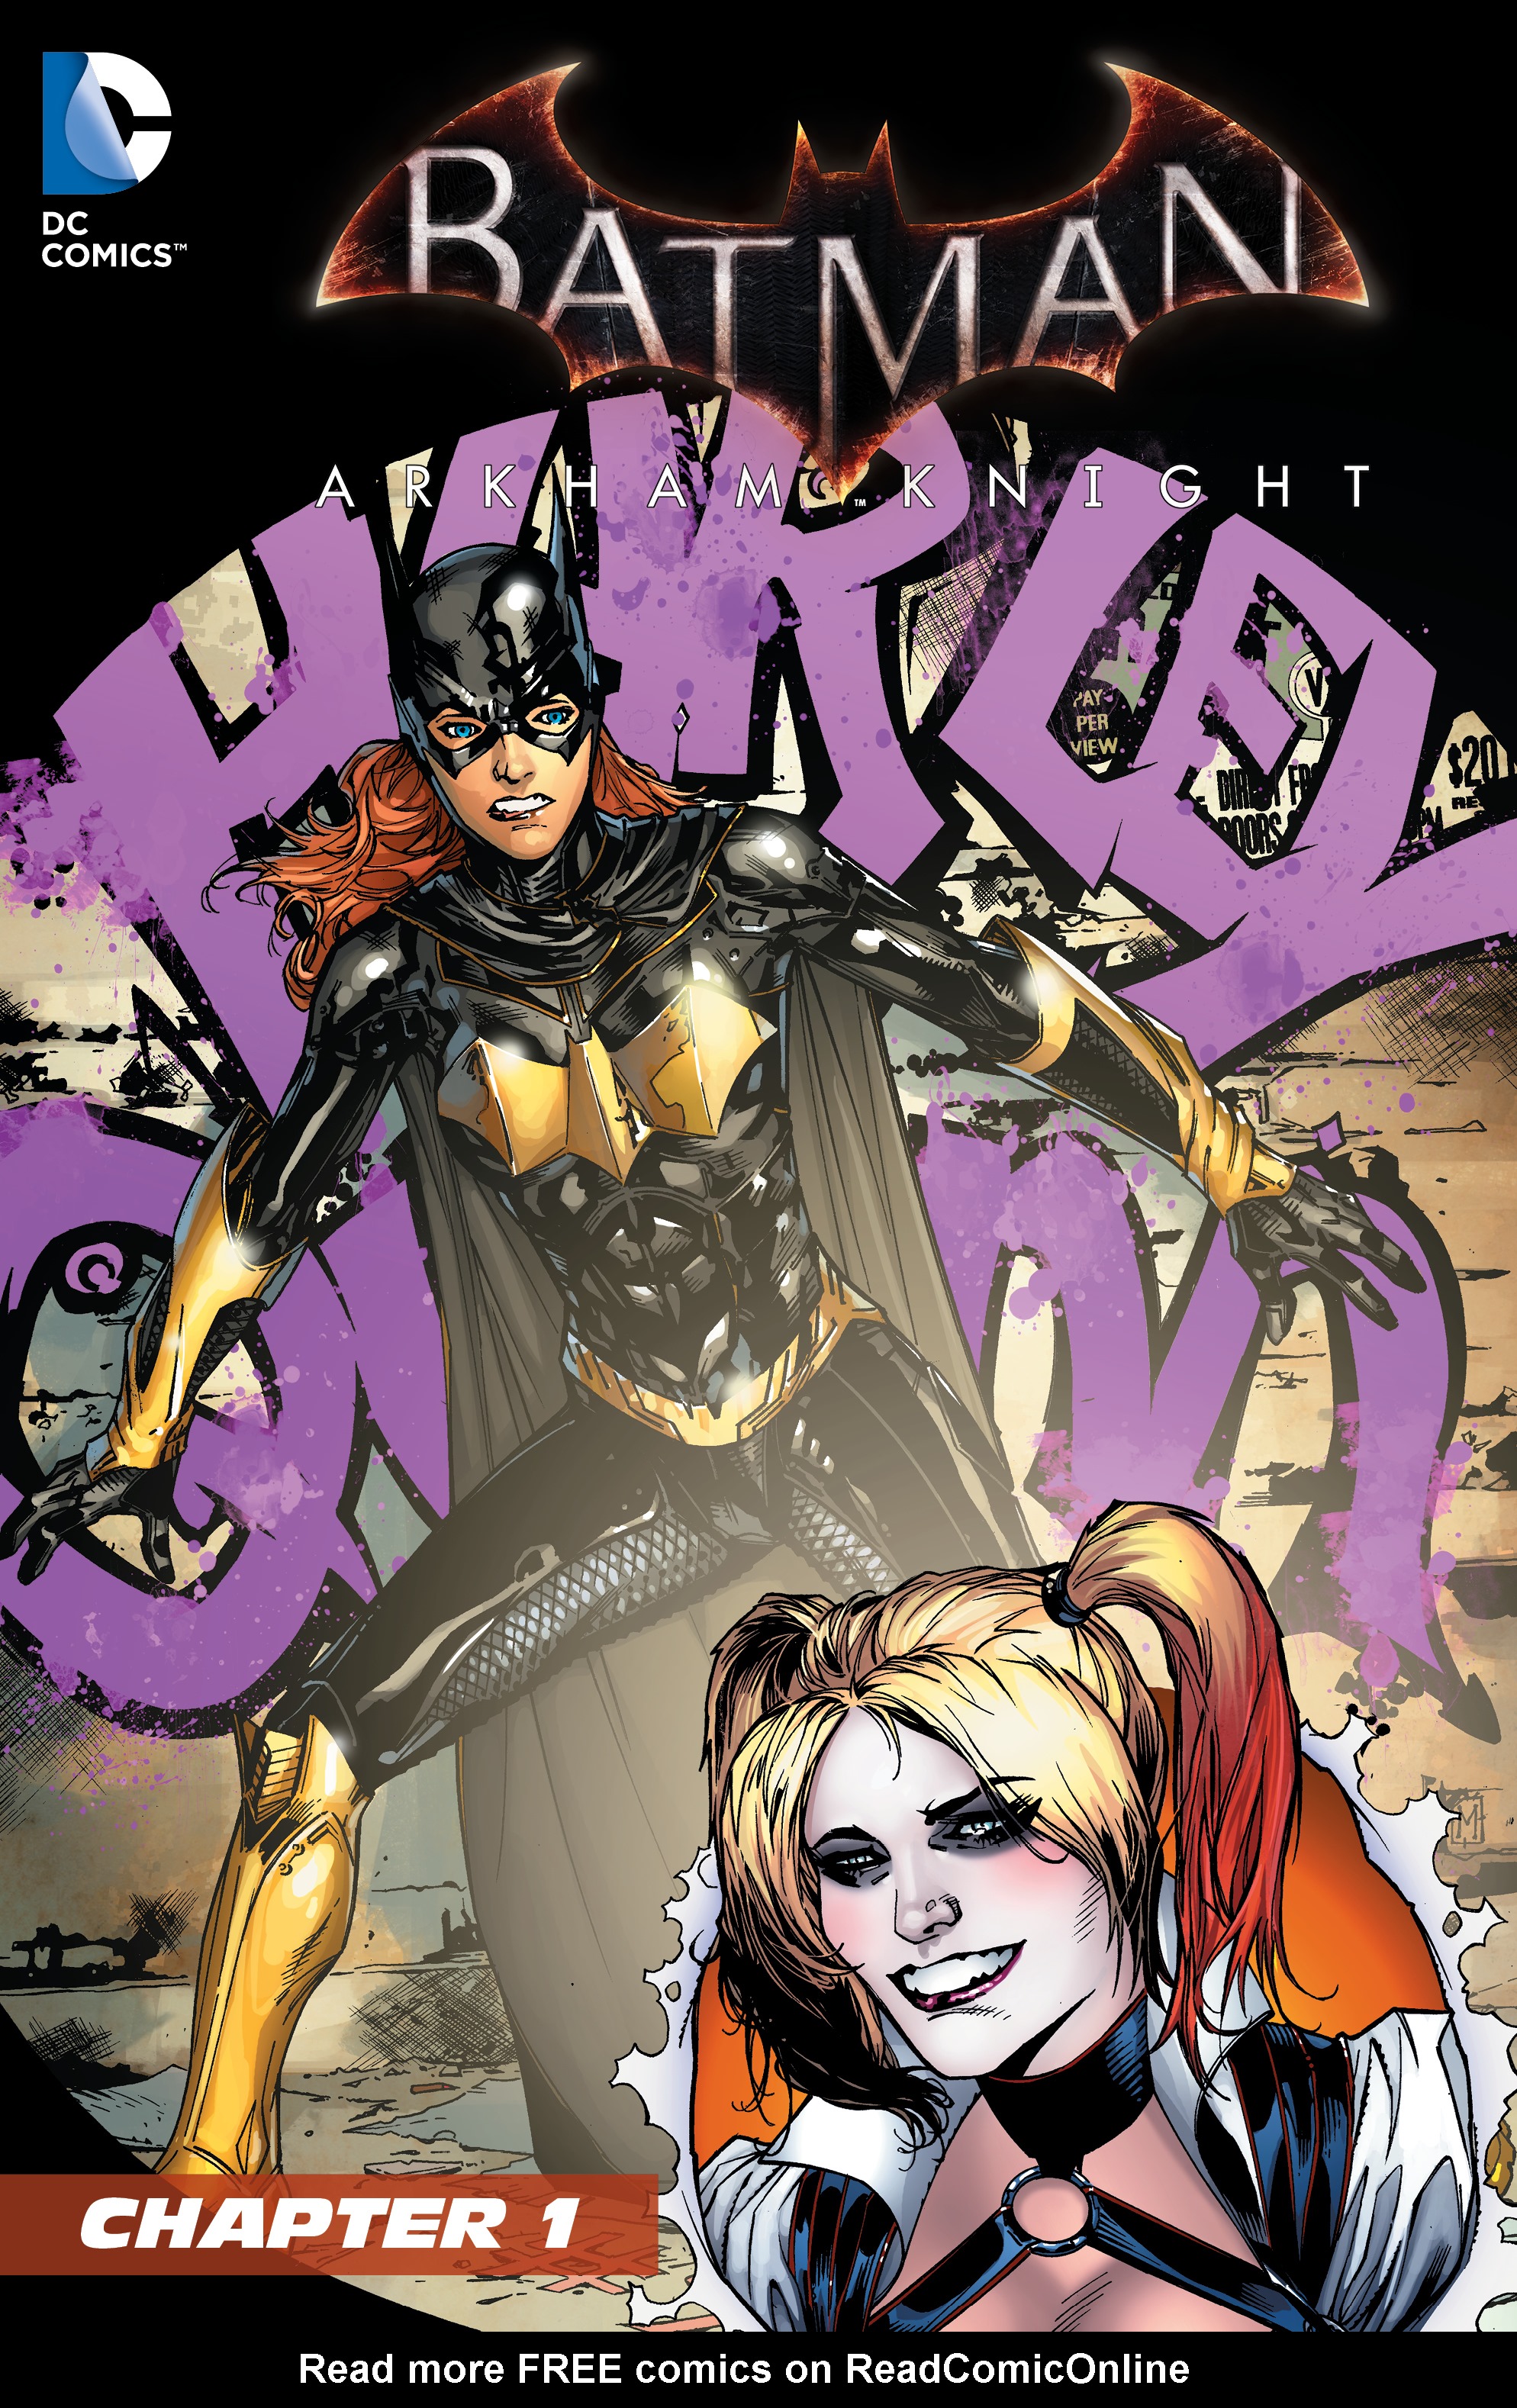 Arkham Knight Harley Quinn Shemale Porn - Batman Arkham Knight Batgirl Harley Quinn Issue 1 | Read Batman Arkham  Knight Batgirl Harley Quinn Issue 1 comic online in high quality. Read Full  Comic online for free - Read comics